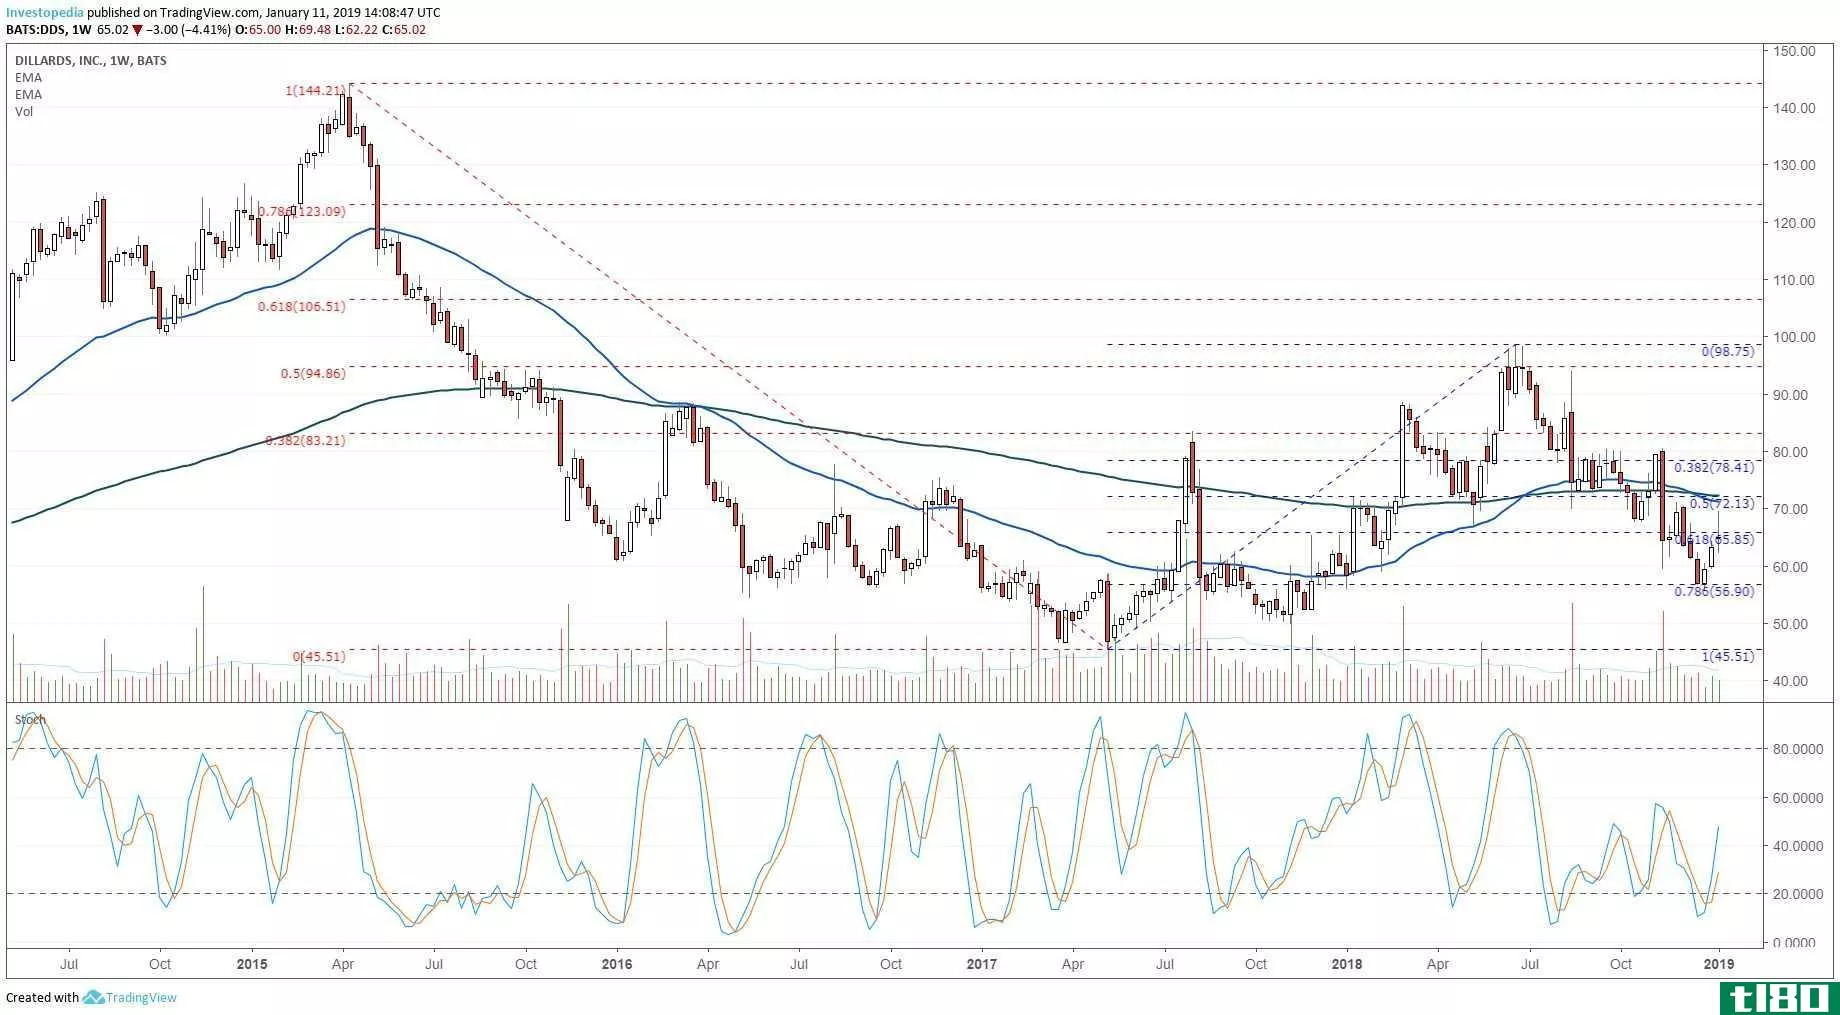 Technical chart showing the share price performance of Dillard's, Inc. (DDS)